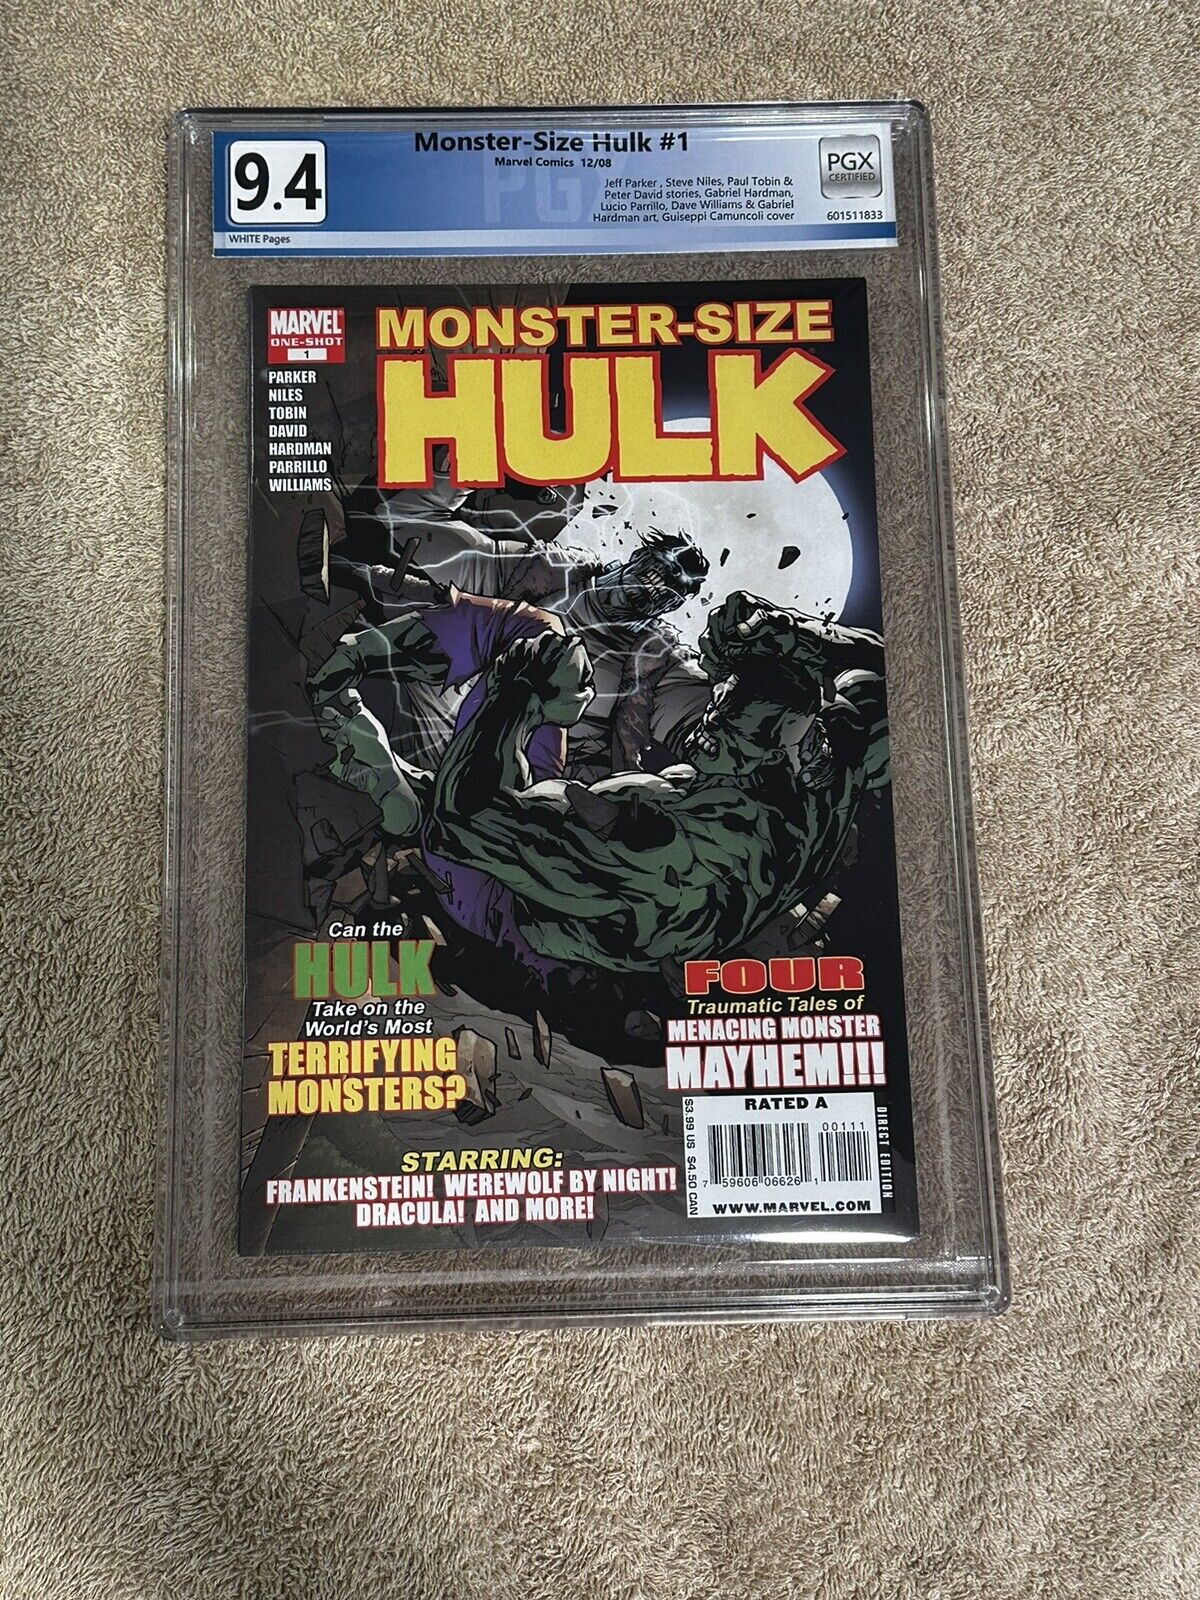 Monster-Size Hulk #1 PGX 9.4 White Pages (Classic 1st Issue Cover)